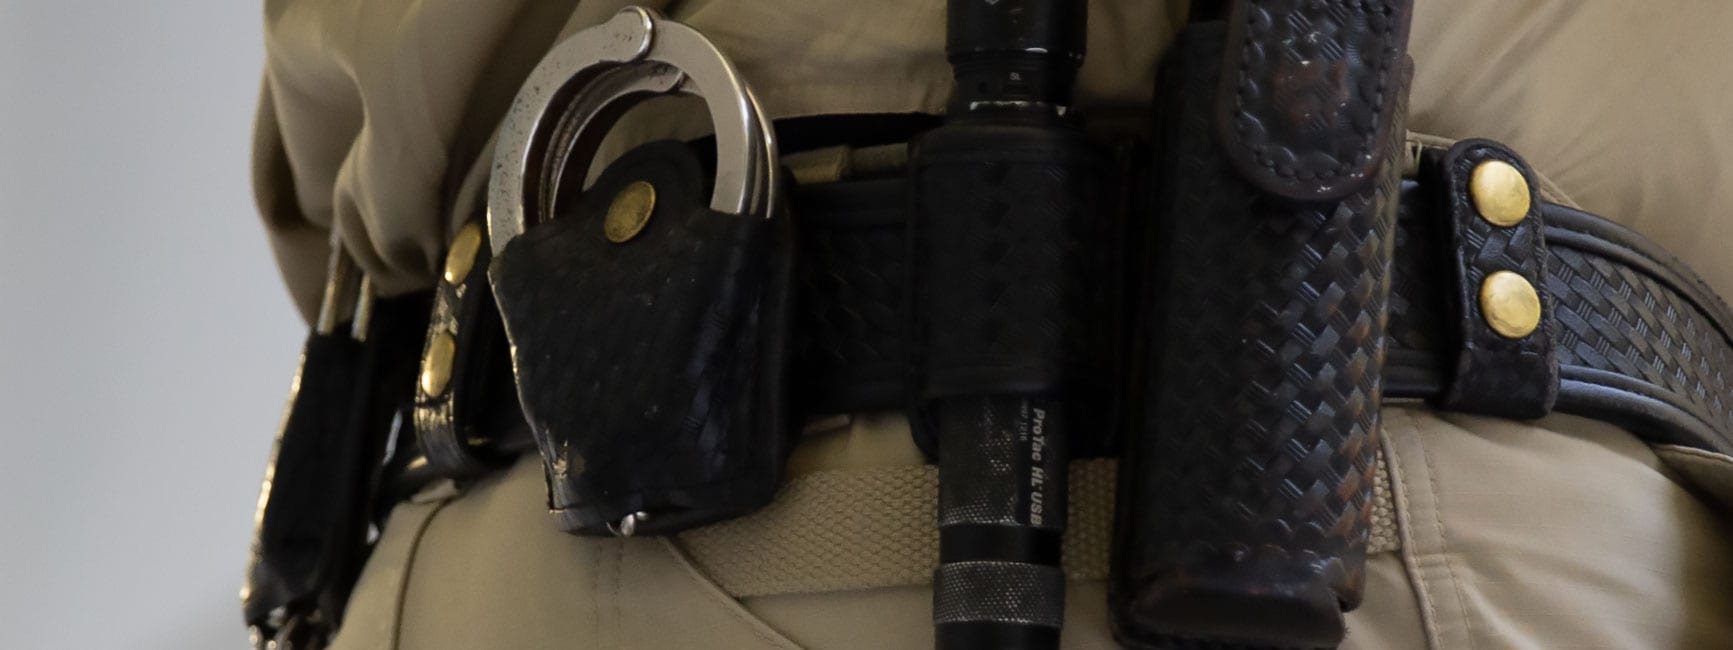 The belt of a security officer with handcuff and flashlight and other tools.